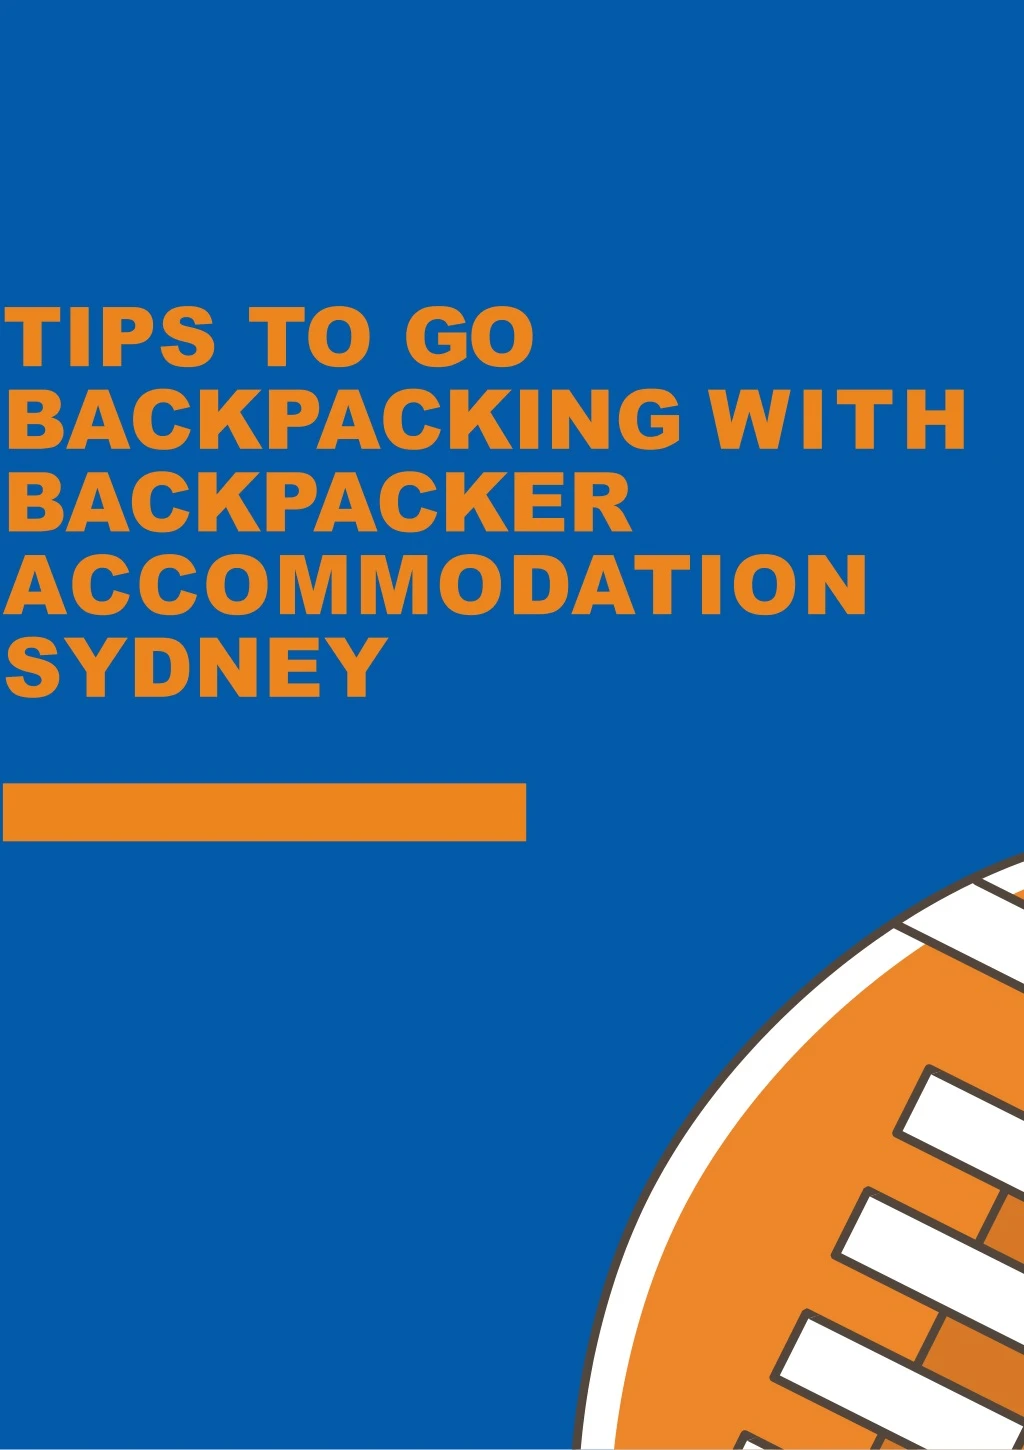 tips to go backpacking with backpacker